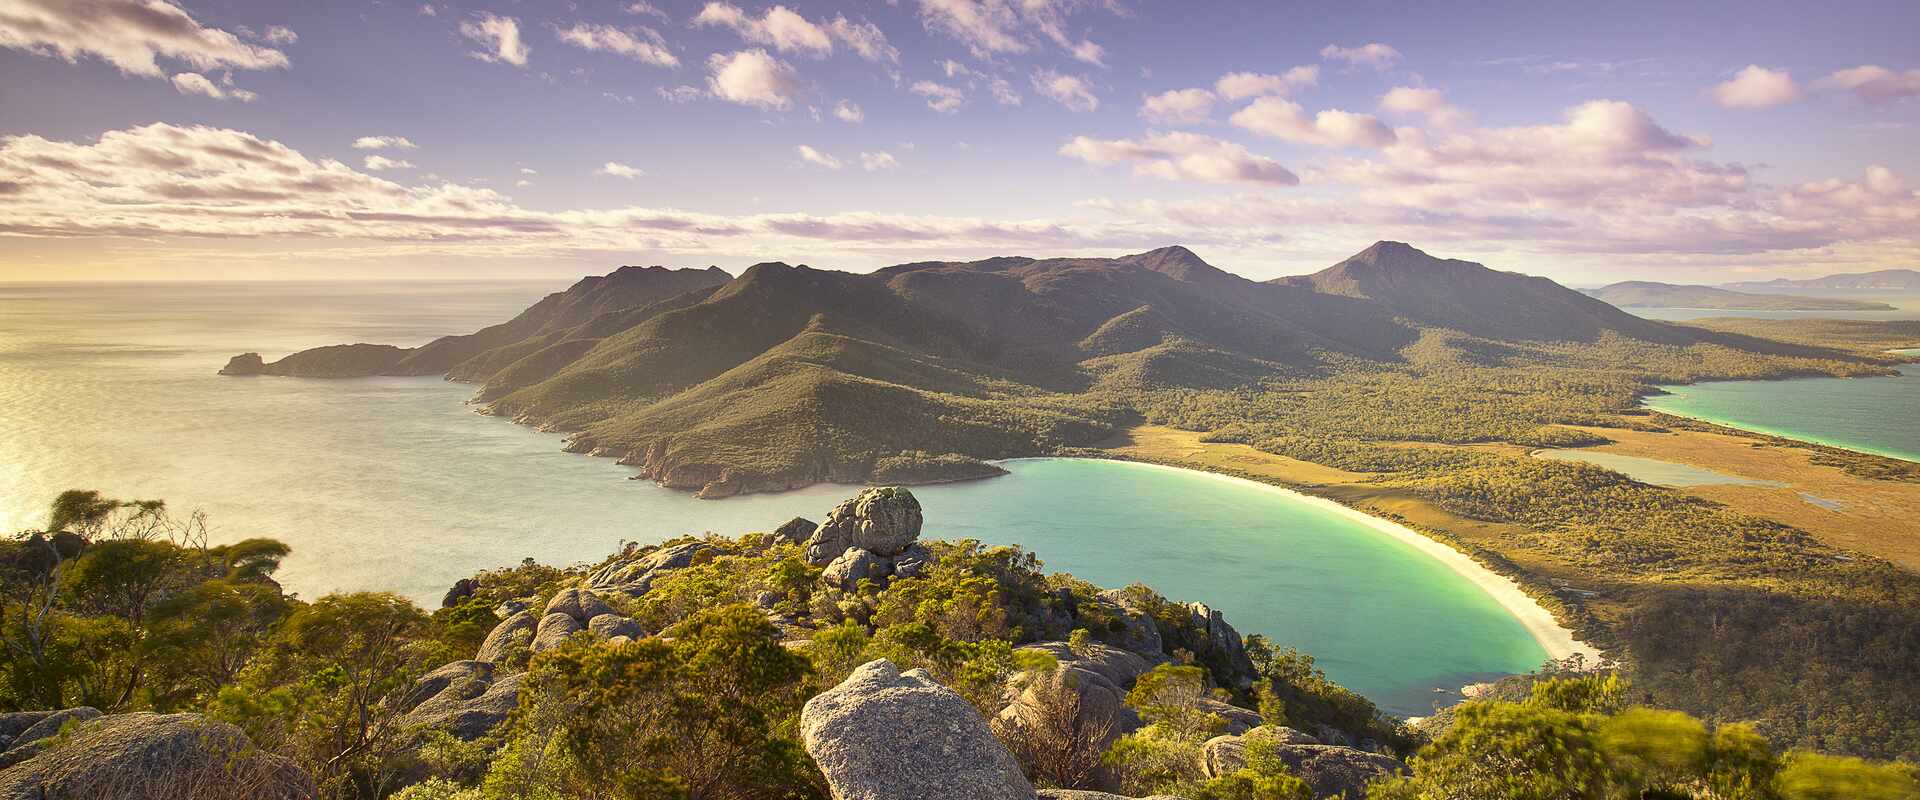 Aerial view over the mountains and pristine beach of Wineglass Bay